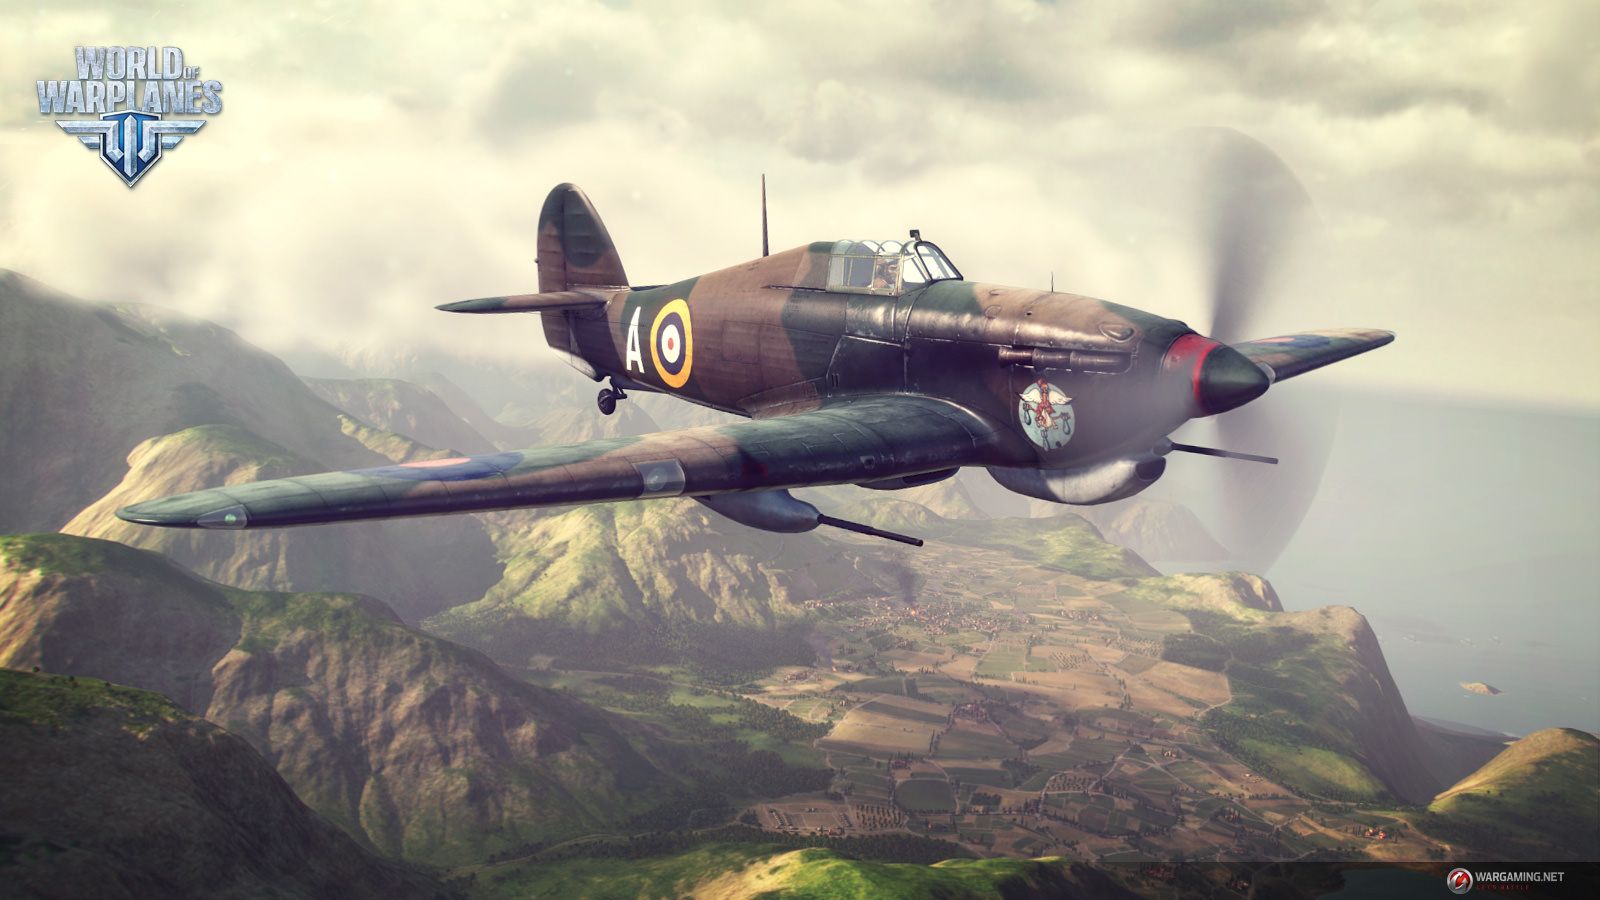 GIVEAWAY Hurricane IID And Yakovlev Yak 3RD Created Events And Contests Of Warplanes North American Official Forum